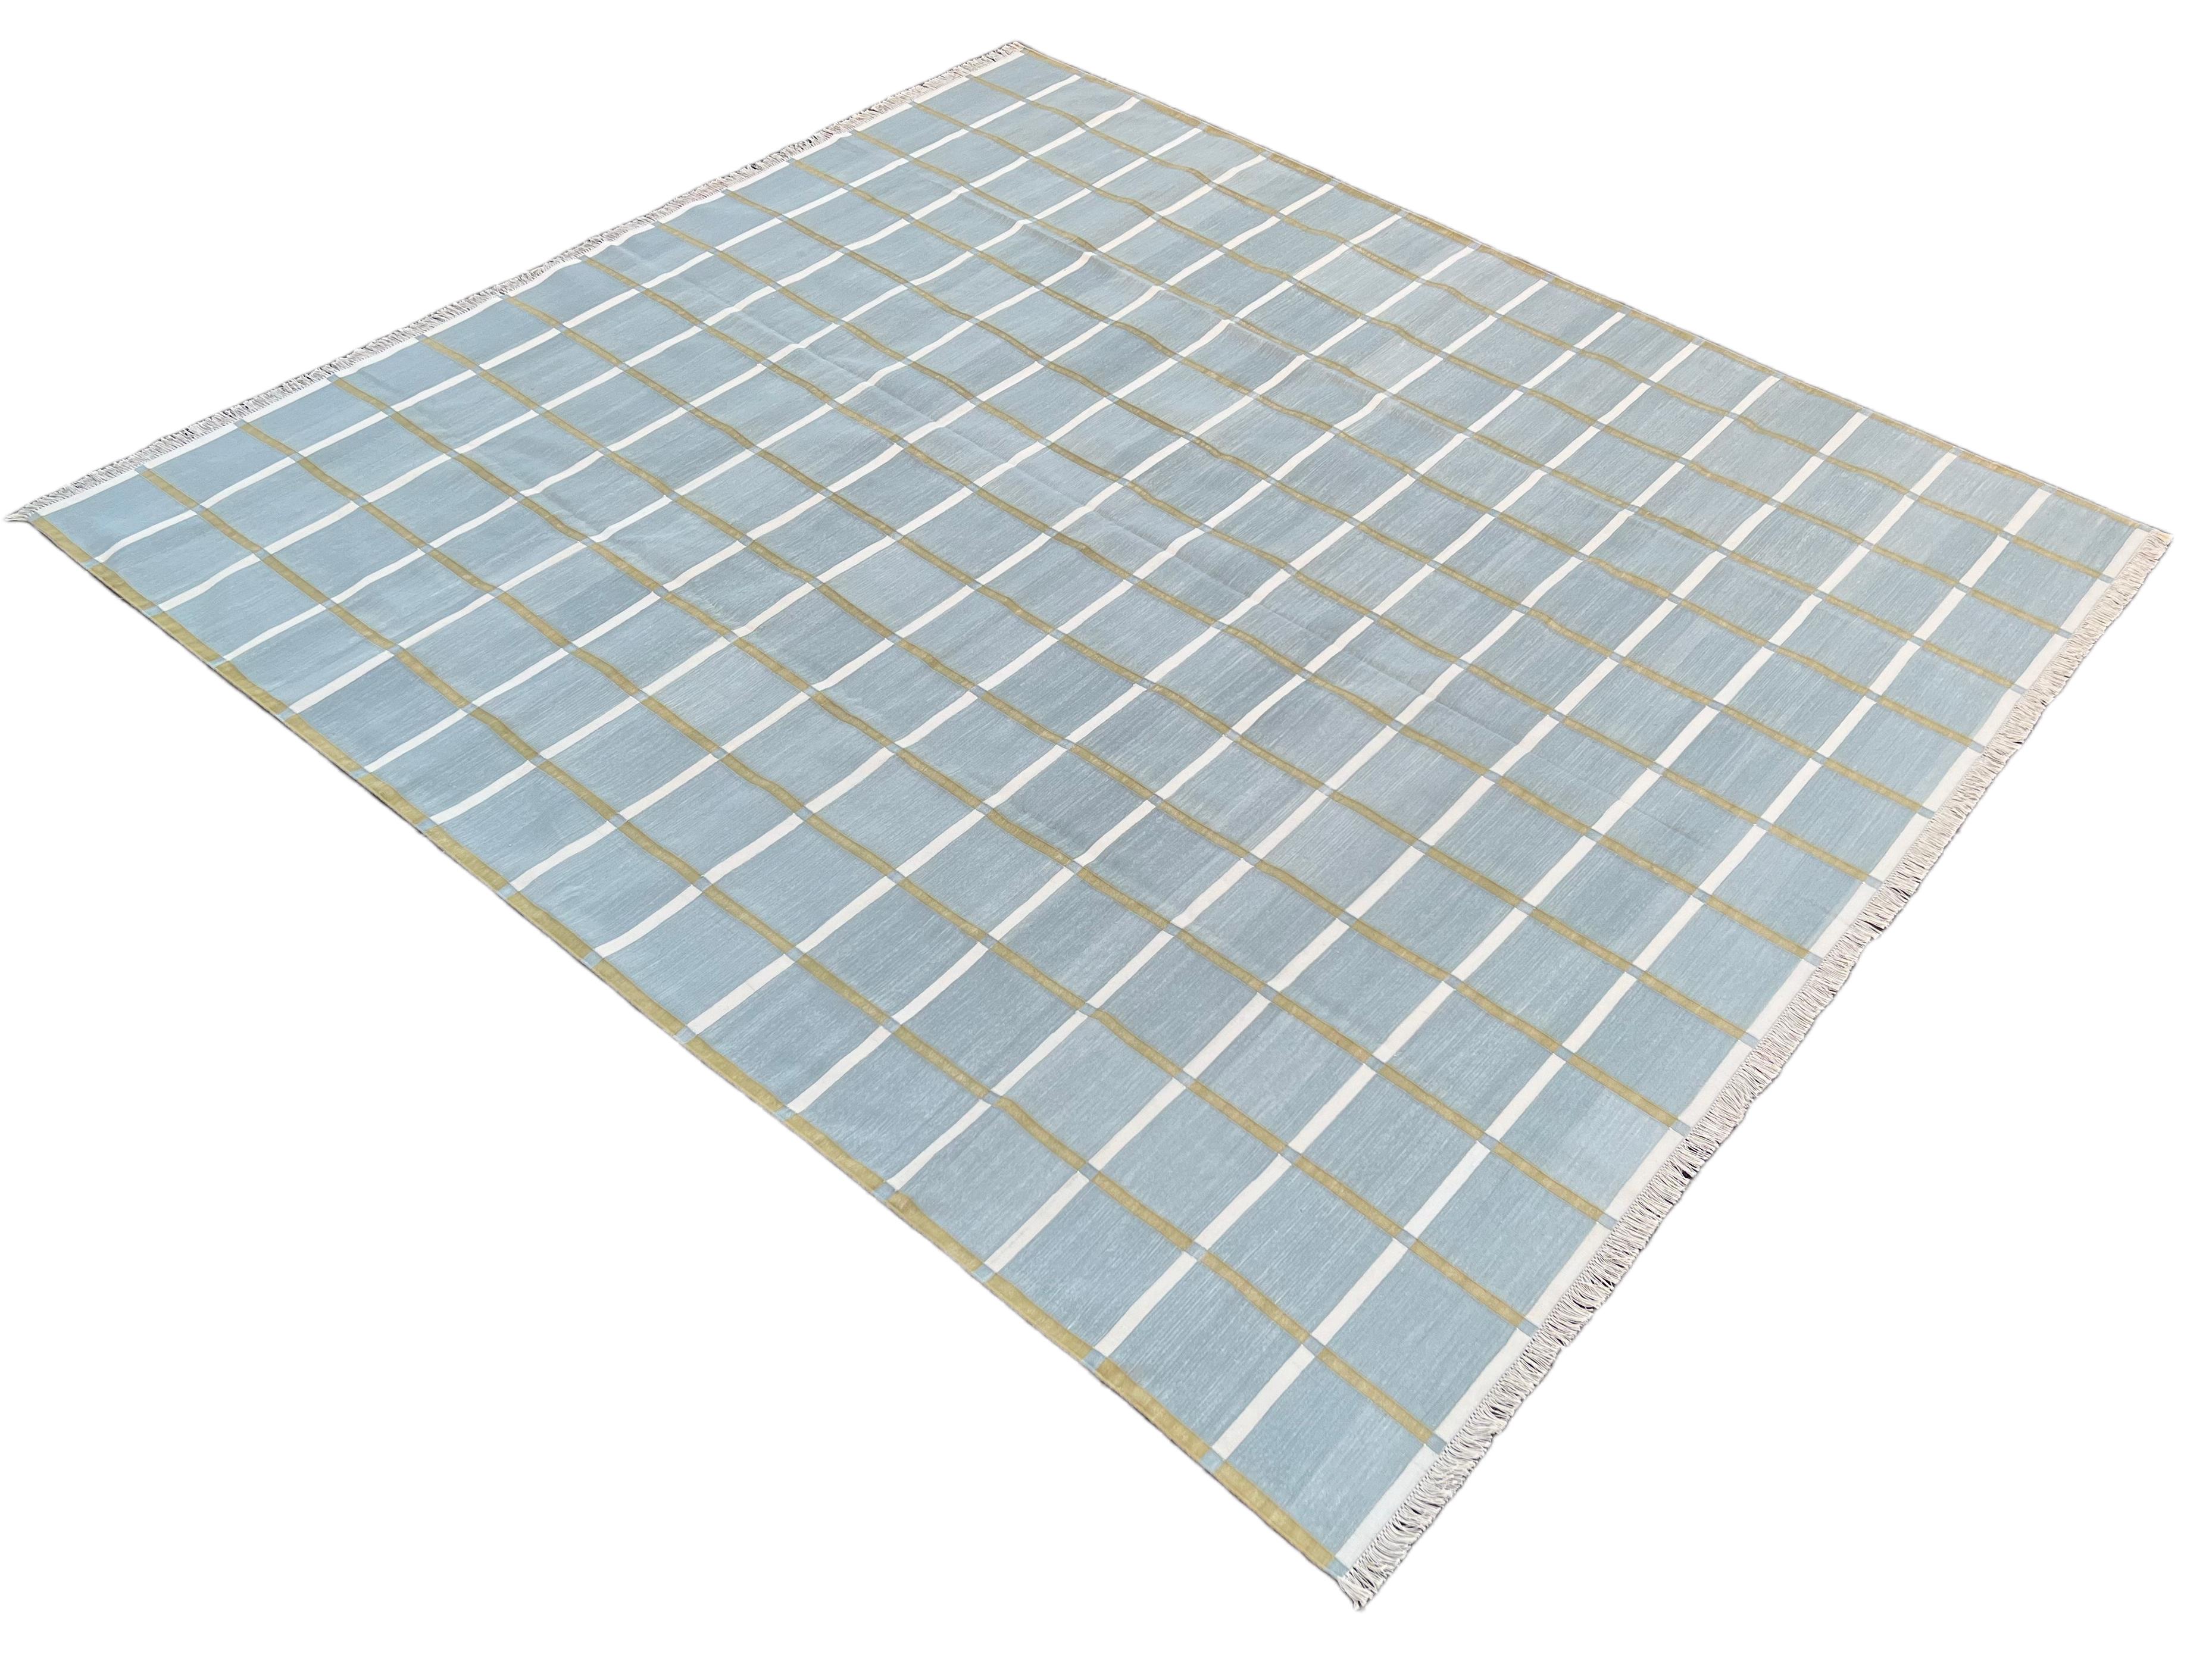 Cotton Vegetable Dyed Area Rug, Grey, Cream And Olive Green Windowpane Checked Indian Rug-5'x8'
These special flat-weave dhurries are hand-woven with 15 ply 100% cotton yarn. Due to the special manufacturing techniques used to create our rugs, the